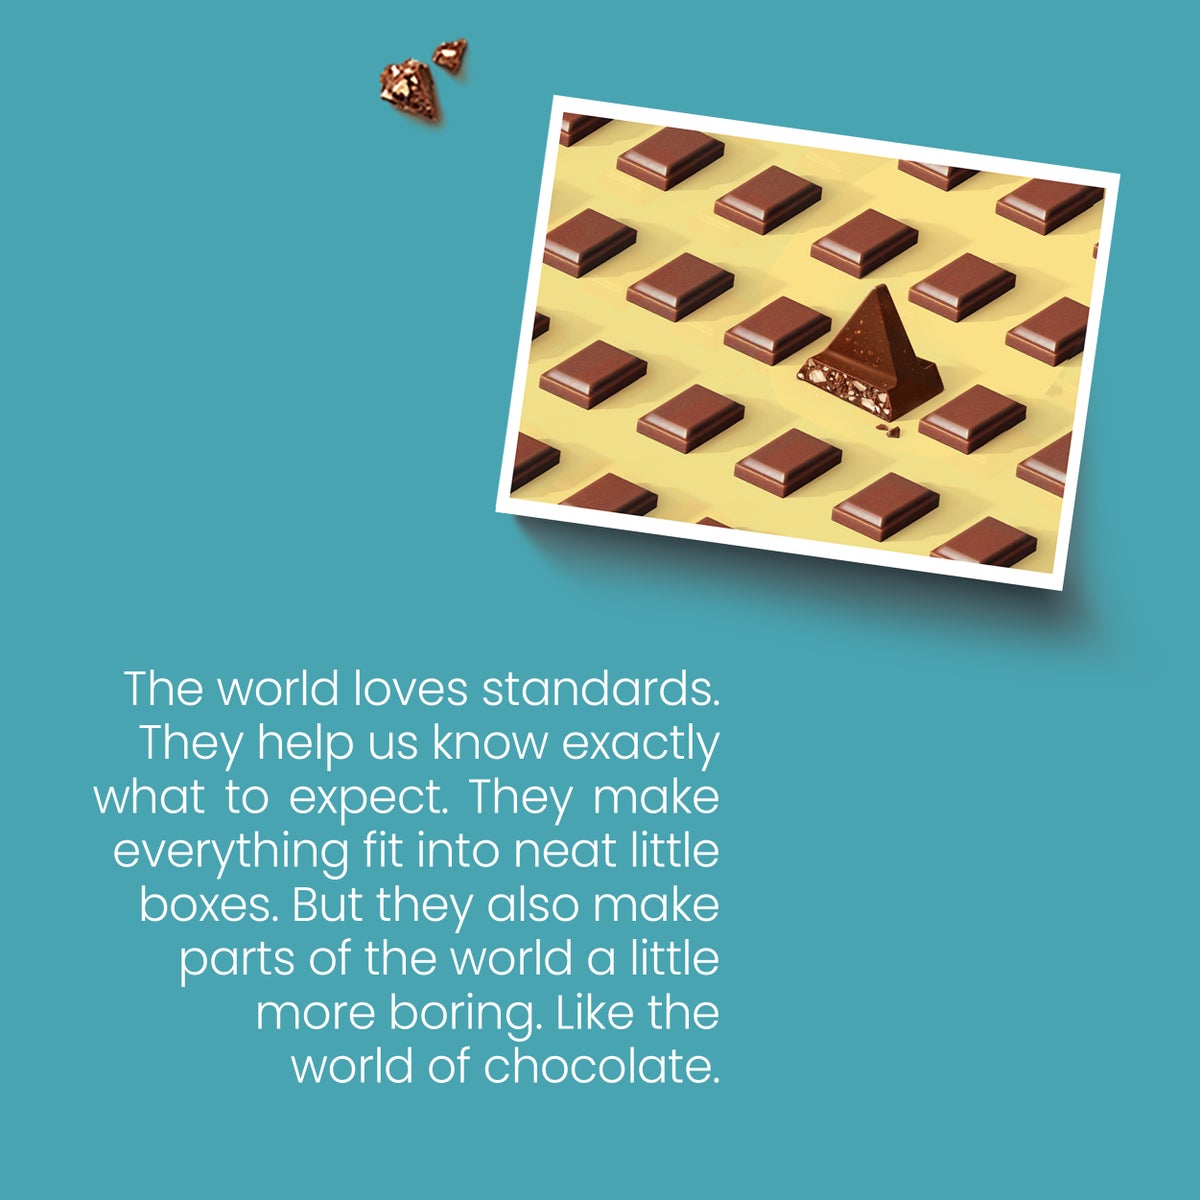 The world loves standards. They help us know exactly what to expect. They make everything fit into neat little boxes. But they also make parts of the world a little ore boring. Like the world of chocolate.